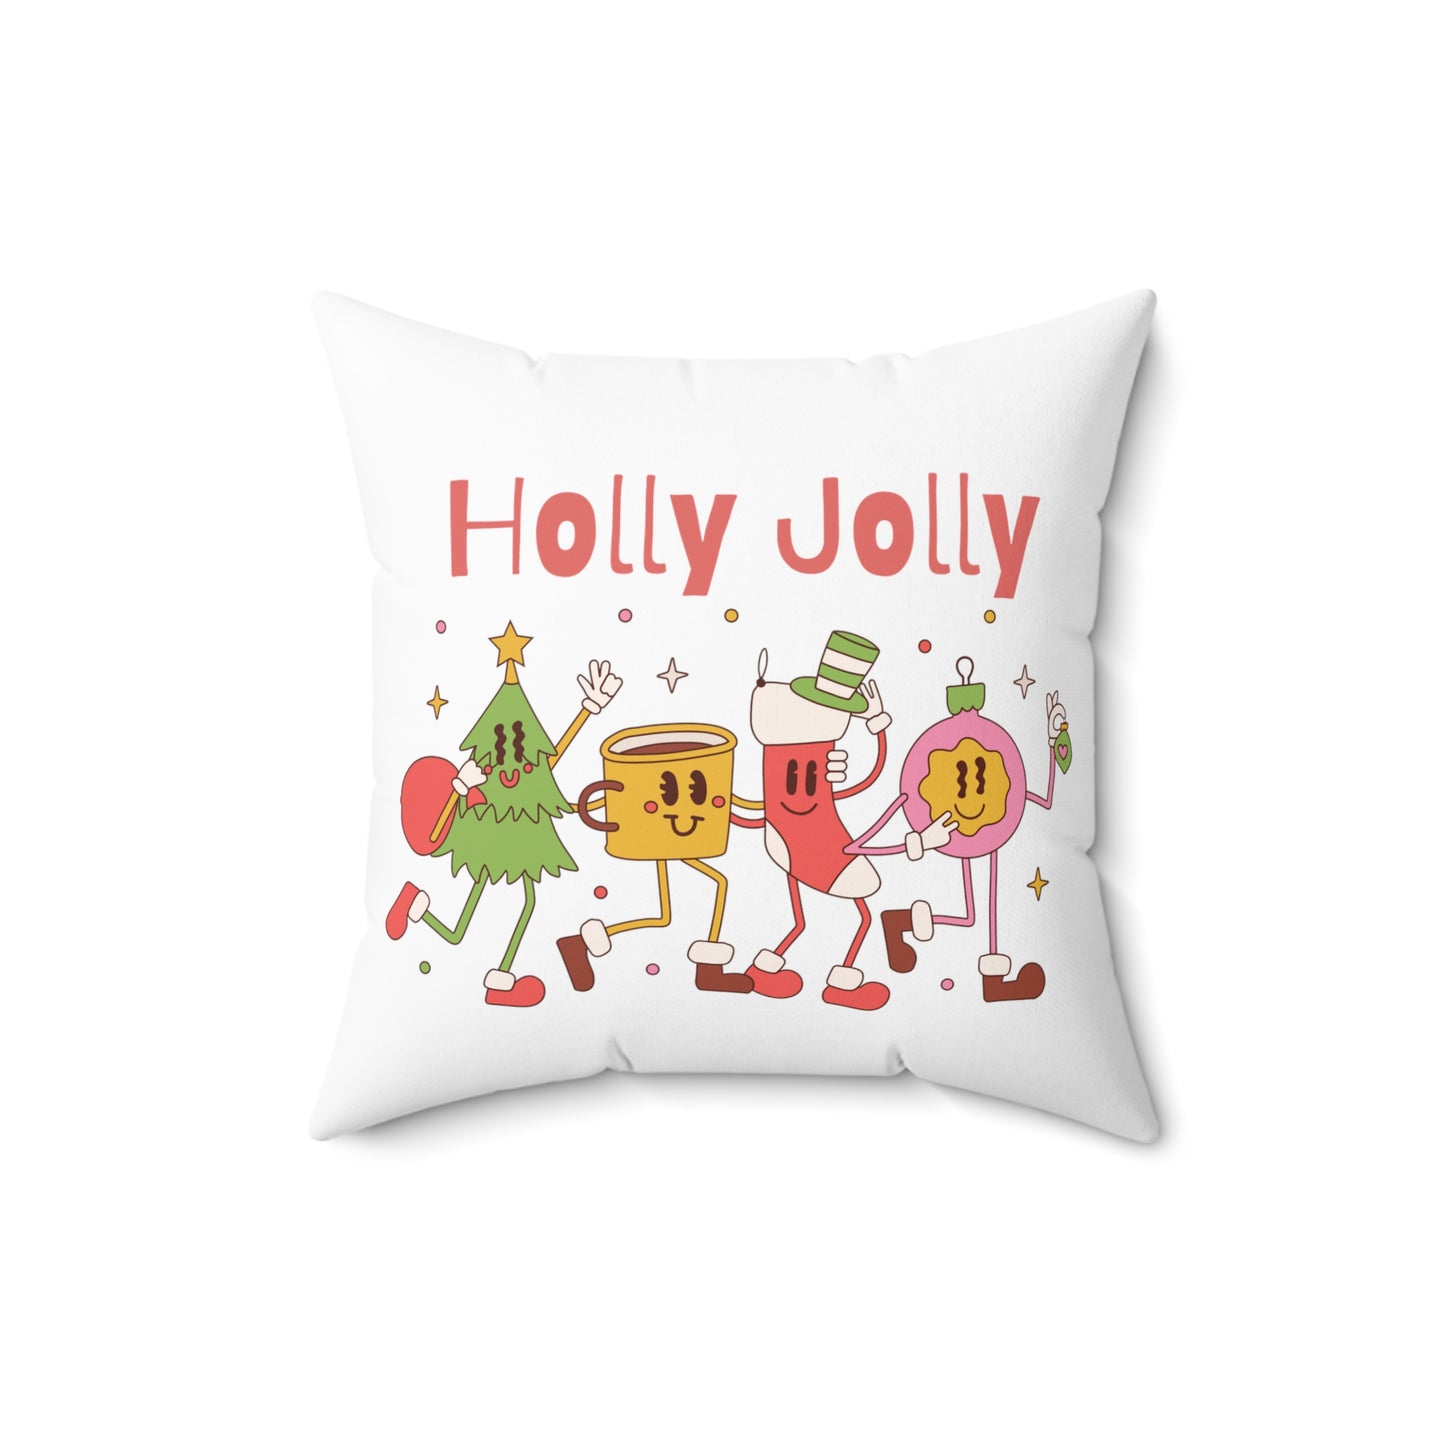 Holly Jolly Printed Polyester Square Pillow